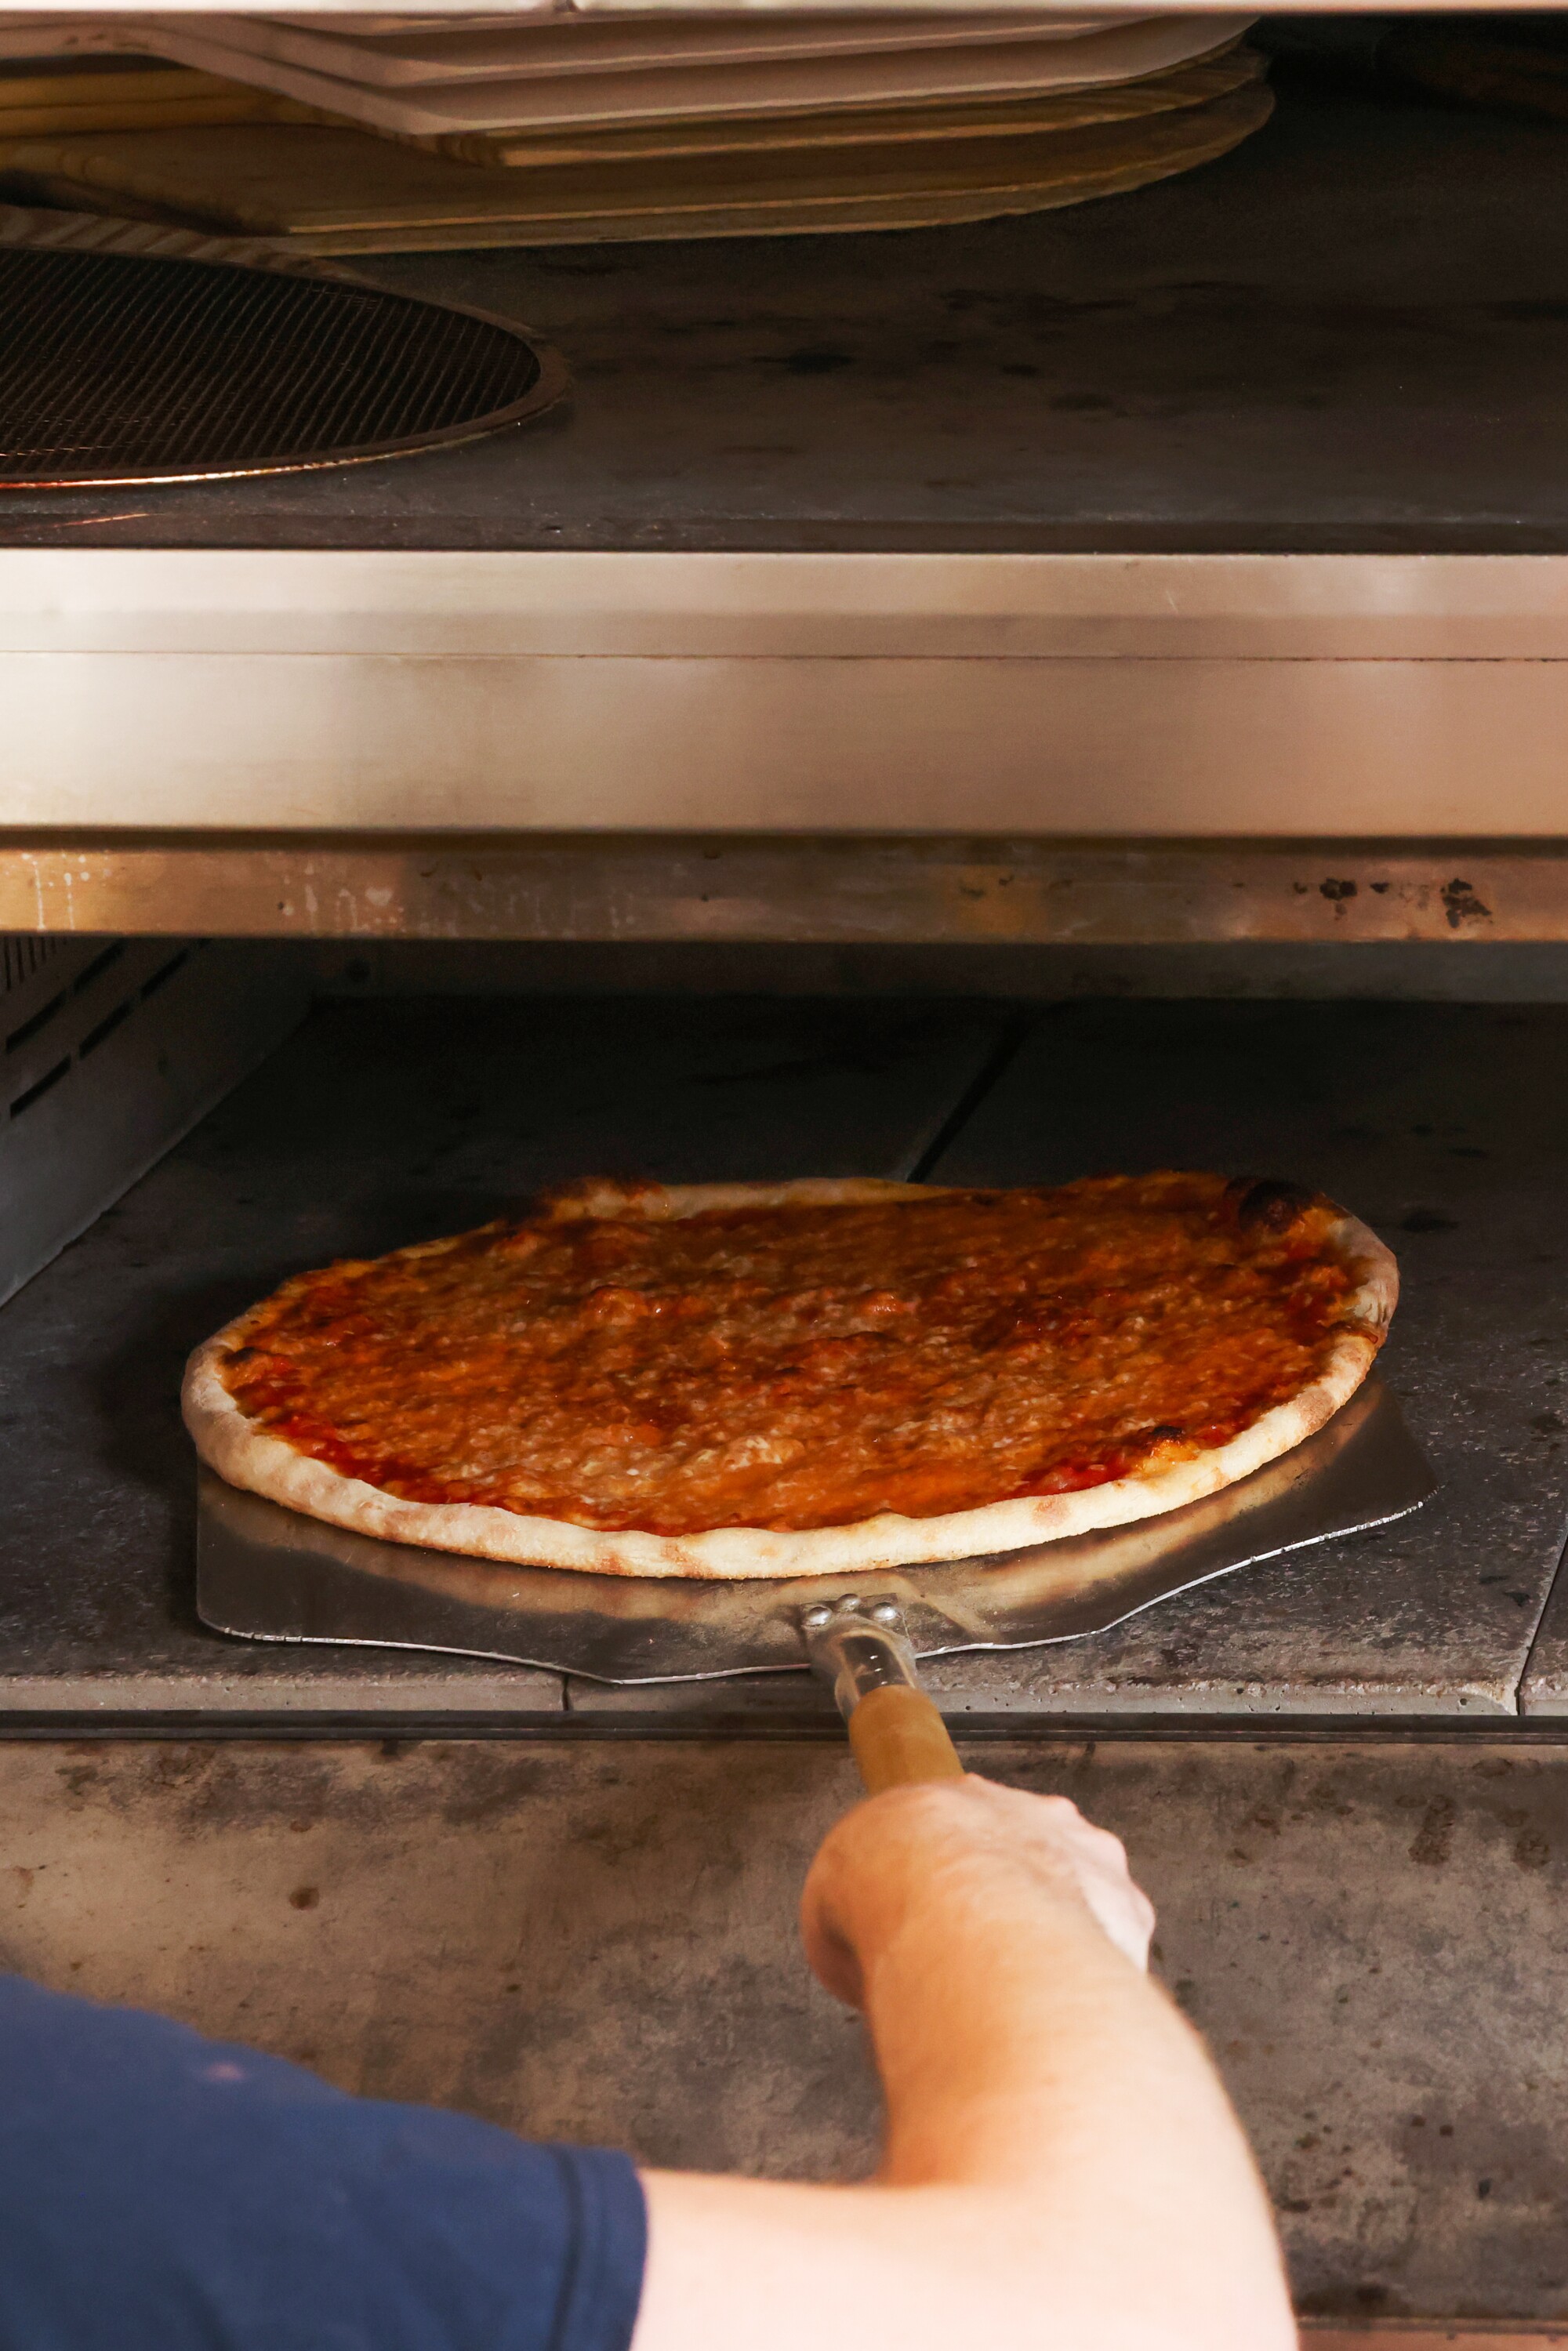 A hand uses a pizza peel to retrieve a cheese pizza from a pizza oven.